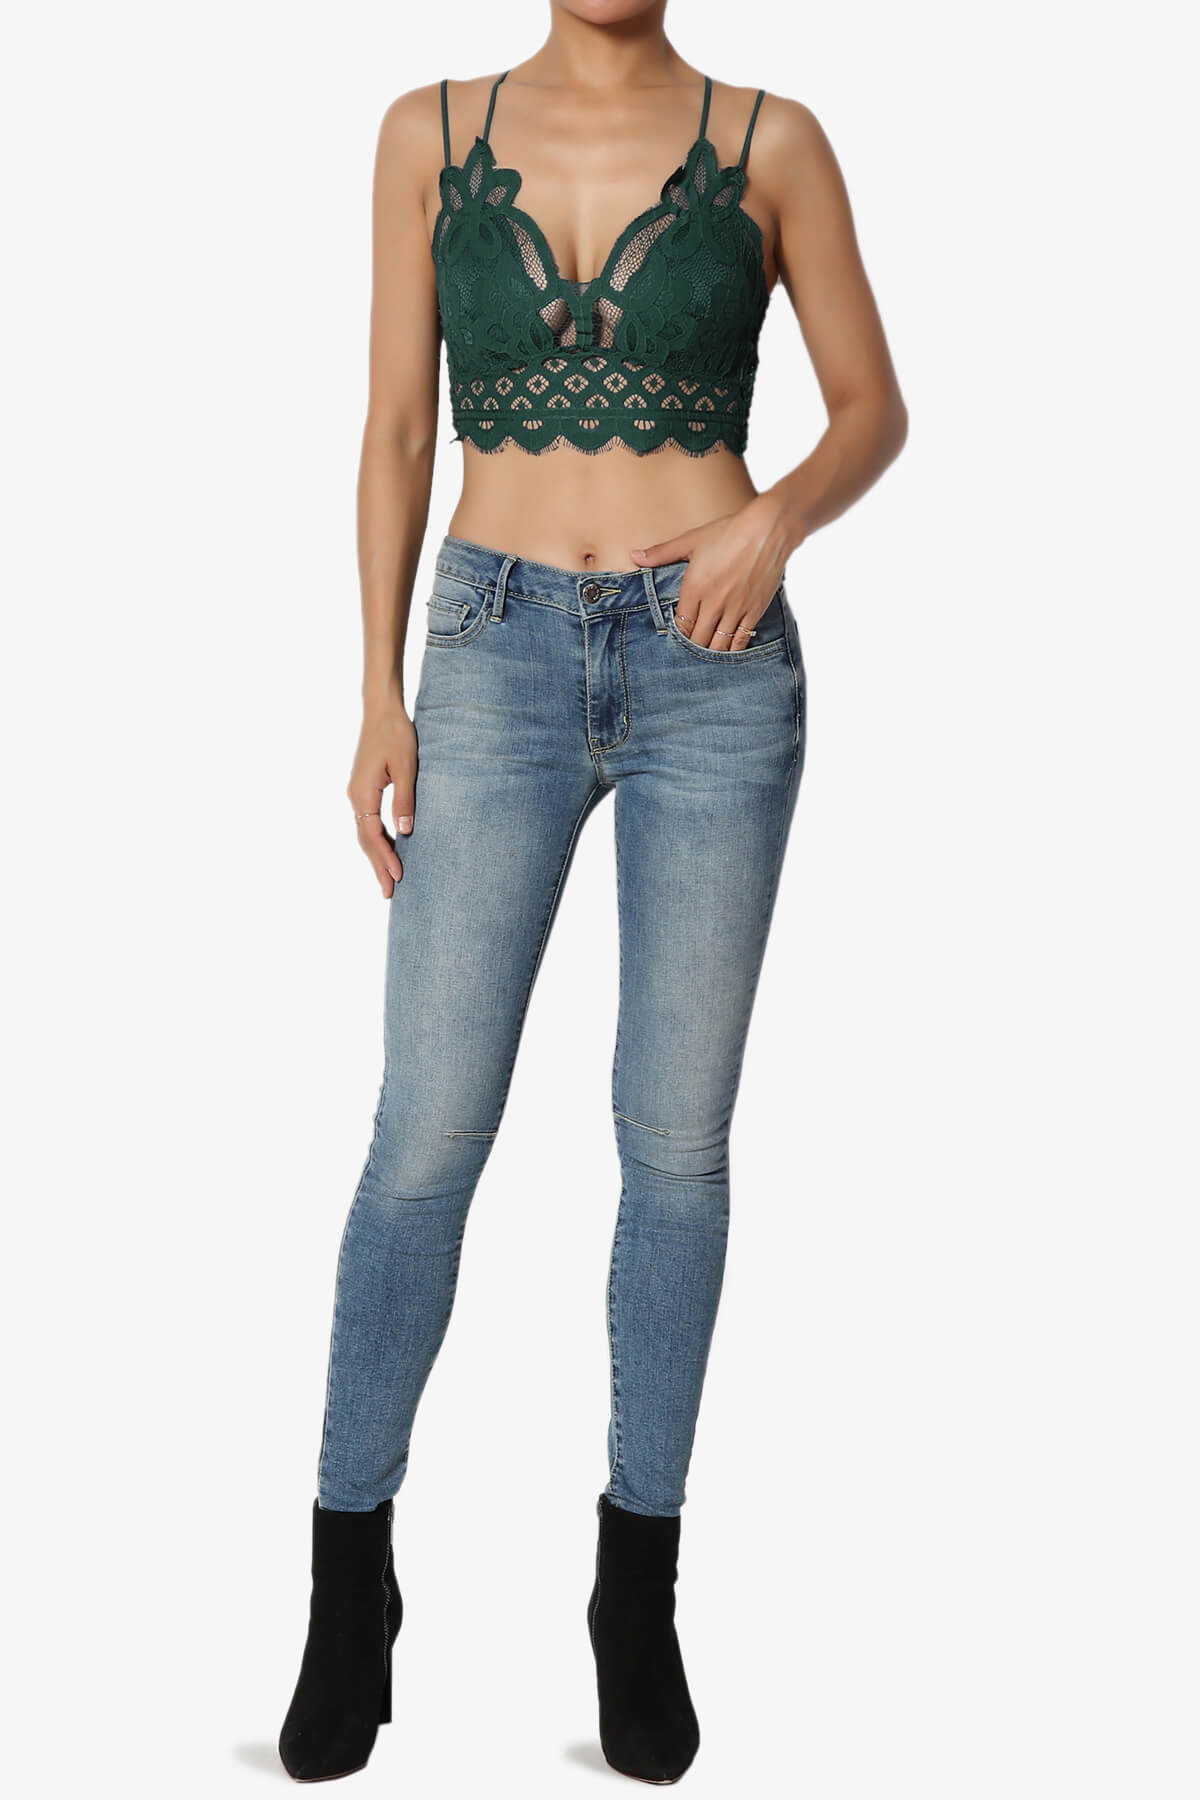 Load image into Gallery viewer, Adella Crochet Lace Bralette HUNTER GREEN_6
